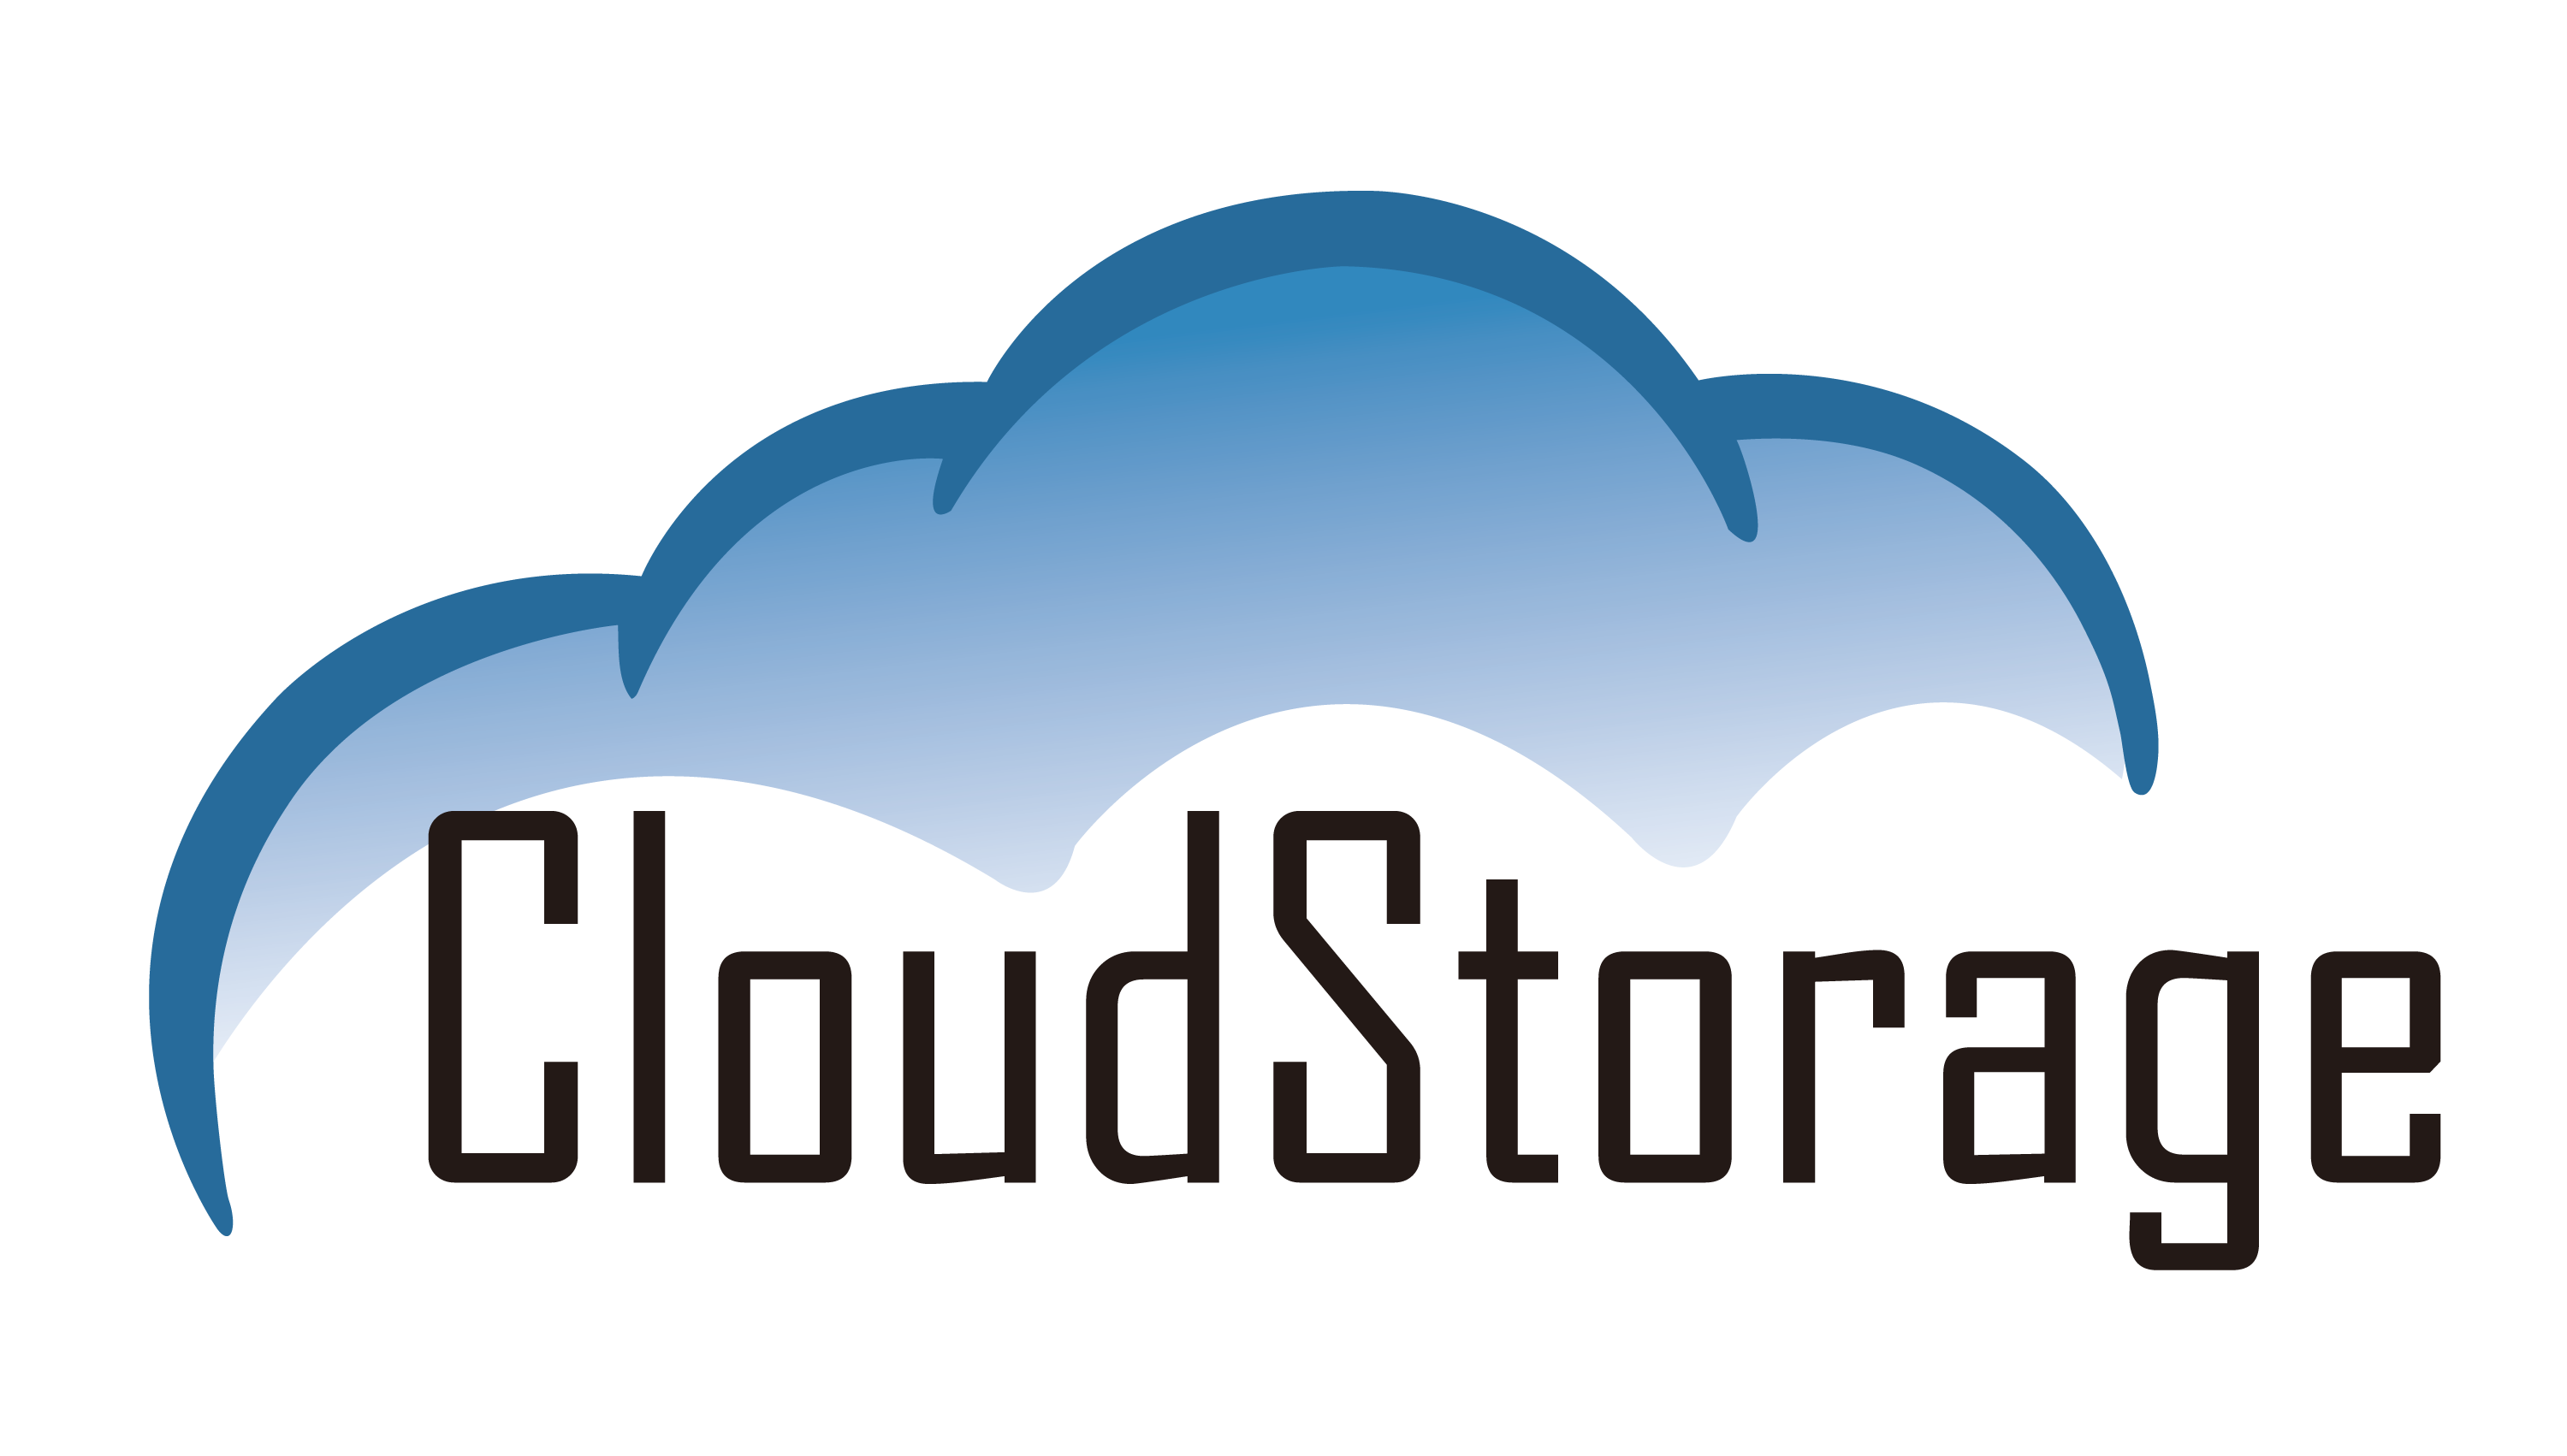 How to choose best Cloud Storage for your Small Business